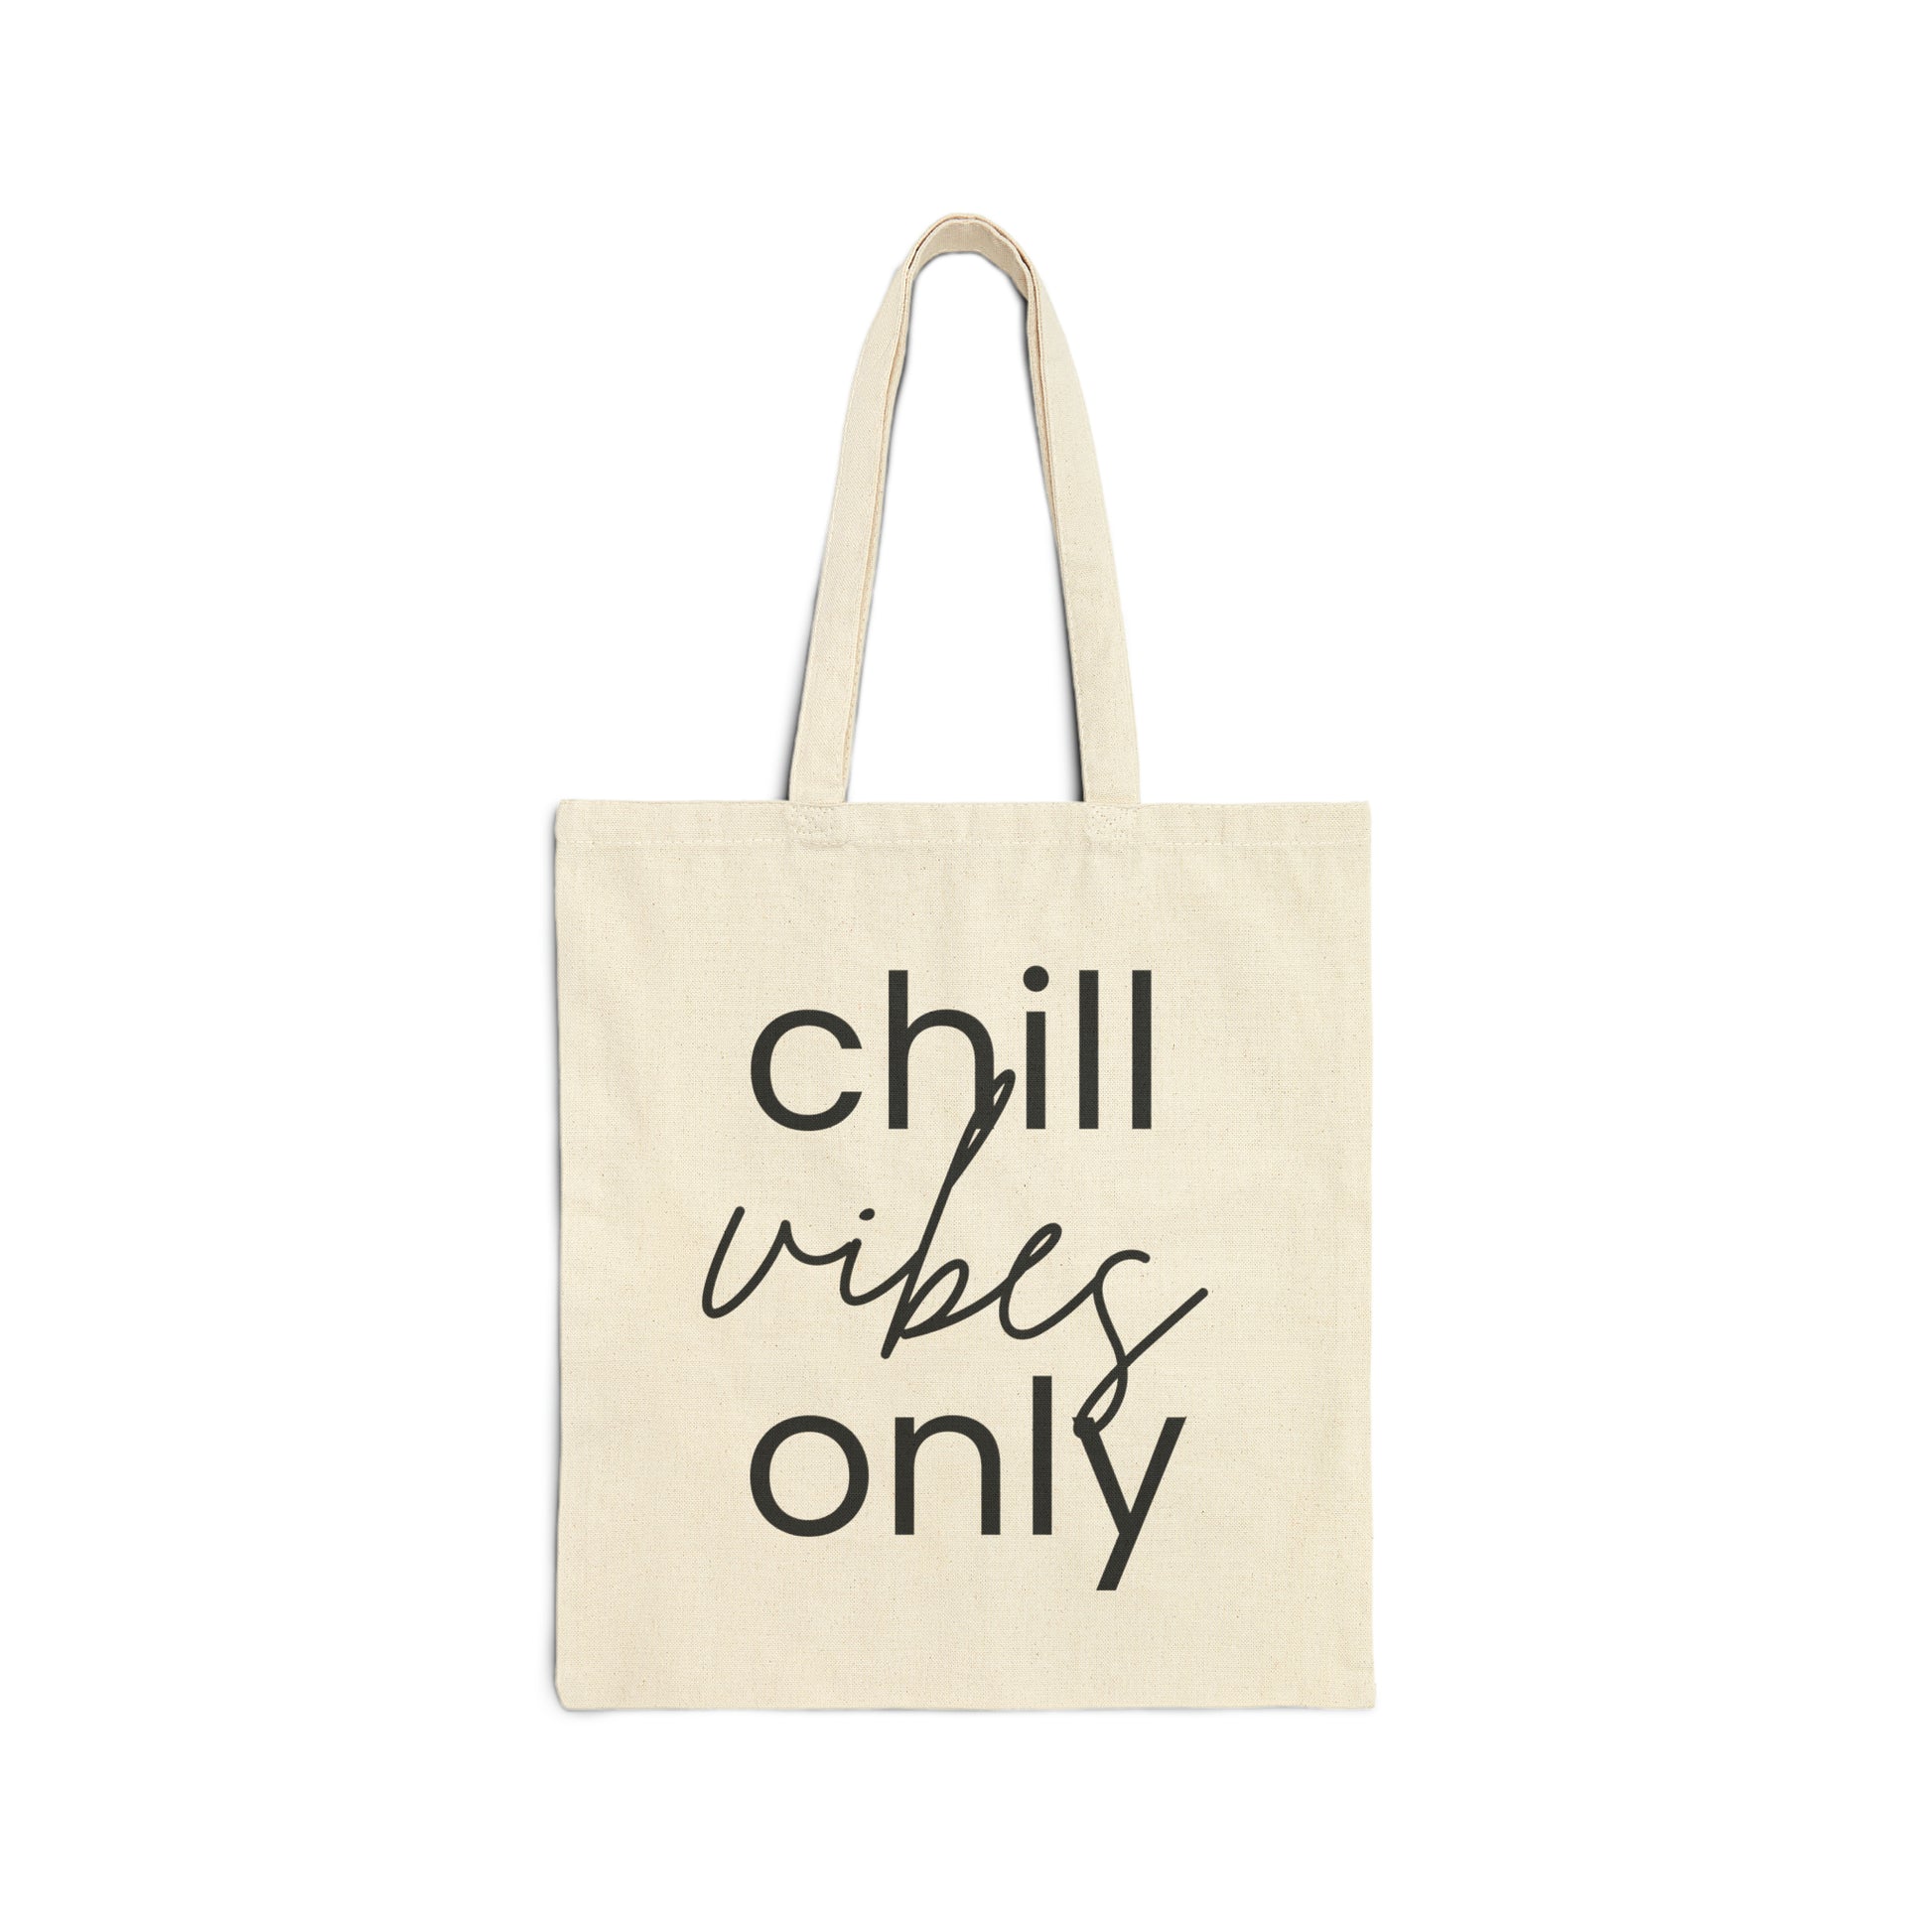 Chill Vibes Only, Yoga tote bag, pilates tote bag, shopper, Gift Under 15, Minimalist, Cute Tote Bag, Gift For Her, funny tote bag, slogan tote bag